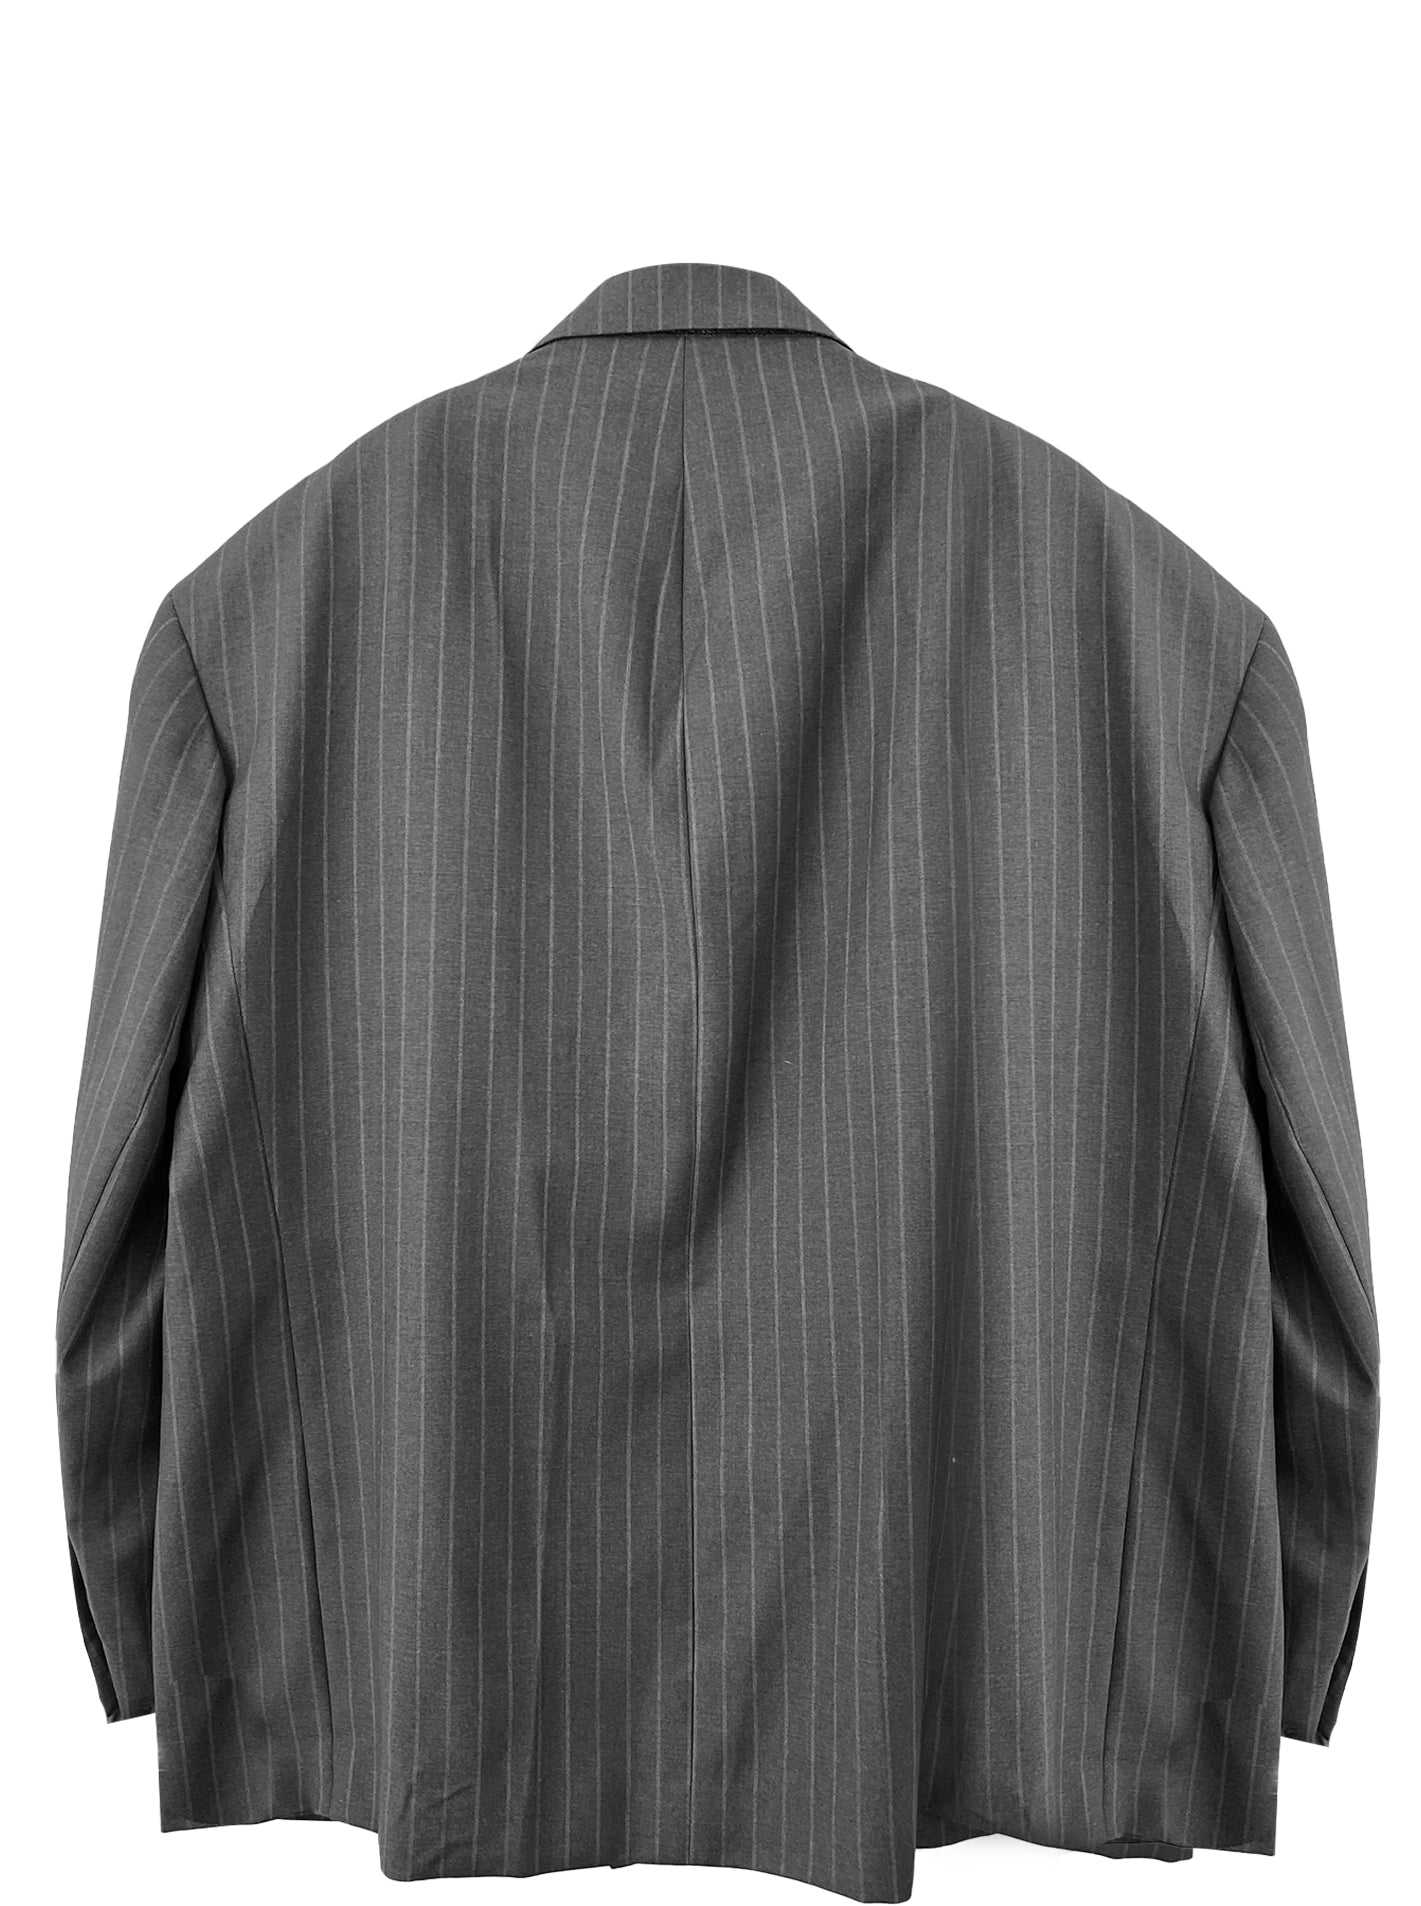 DOUBLE-BREASTED PRESSED JACKET (STRIPE)